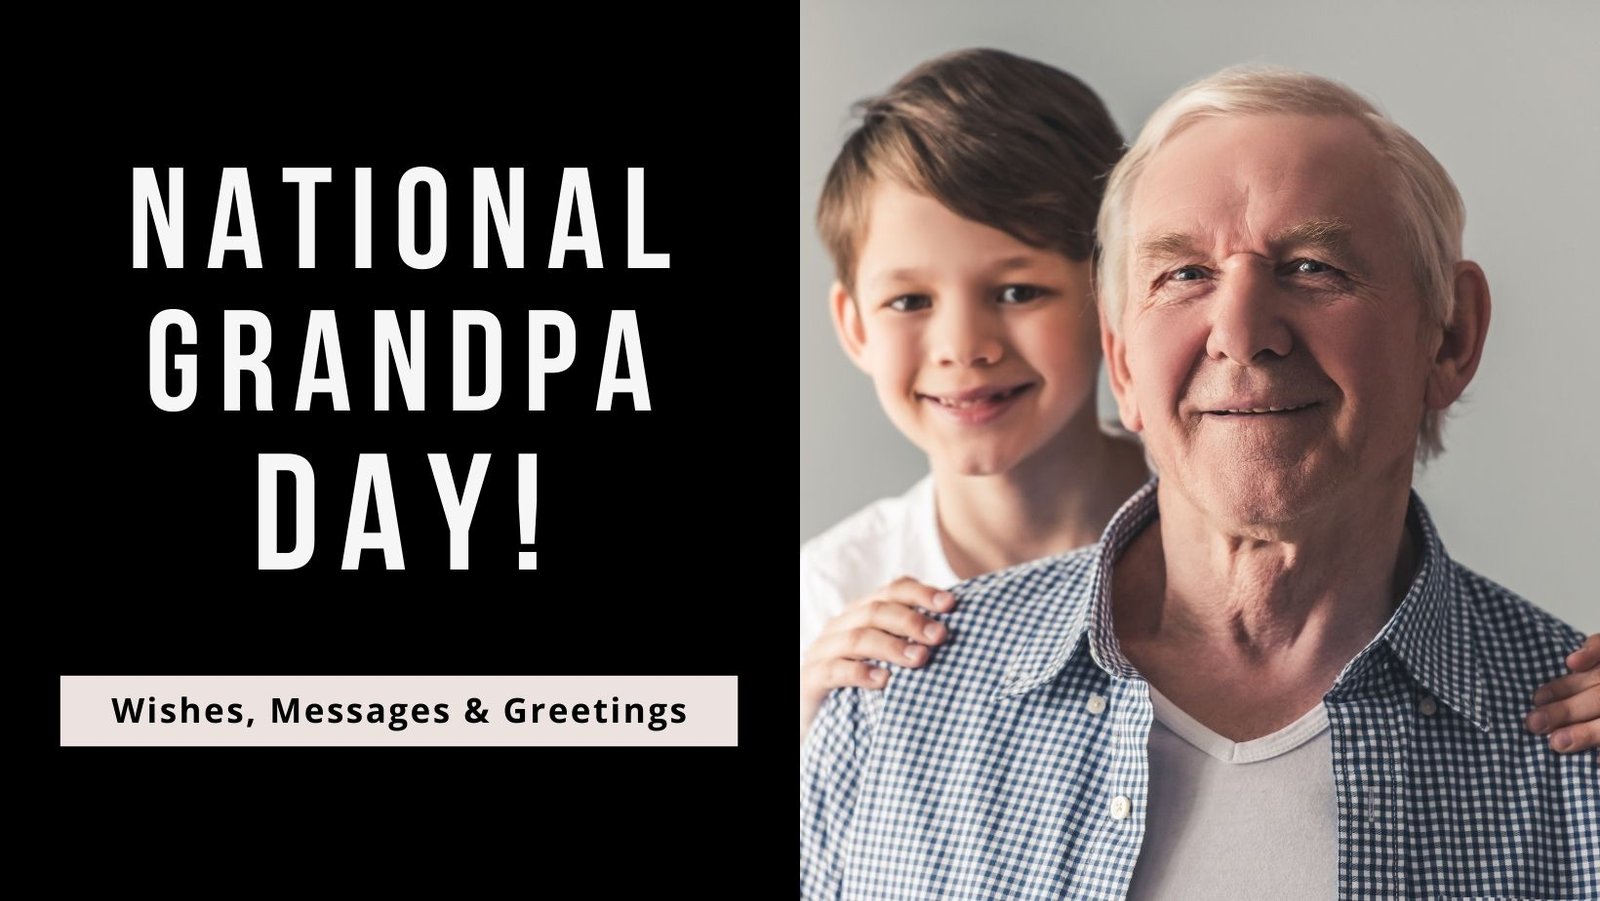 Heartwarming National Grandpa Day Messages , Greetings to Make His Day